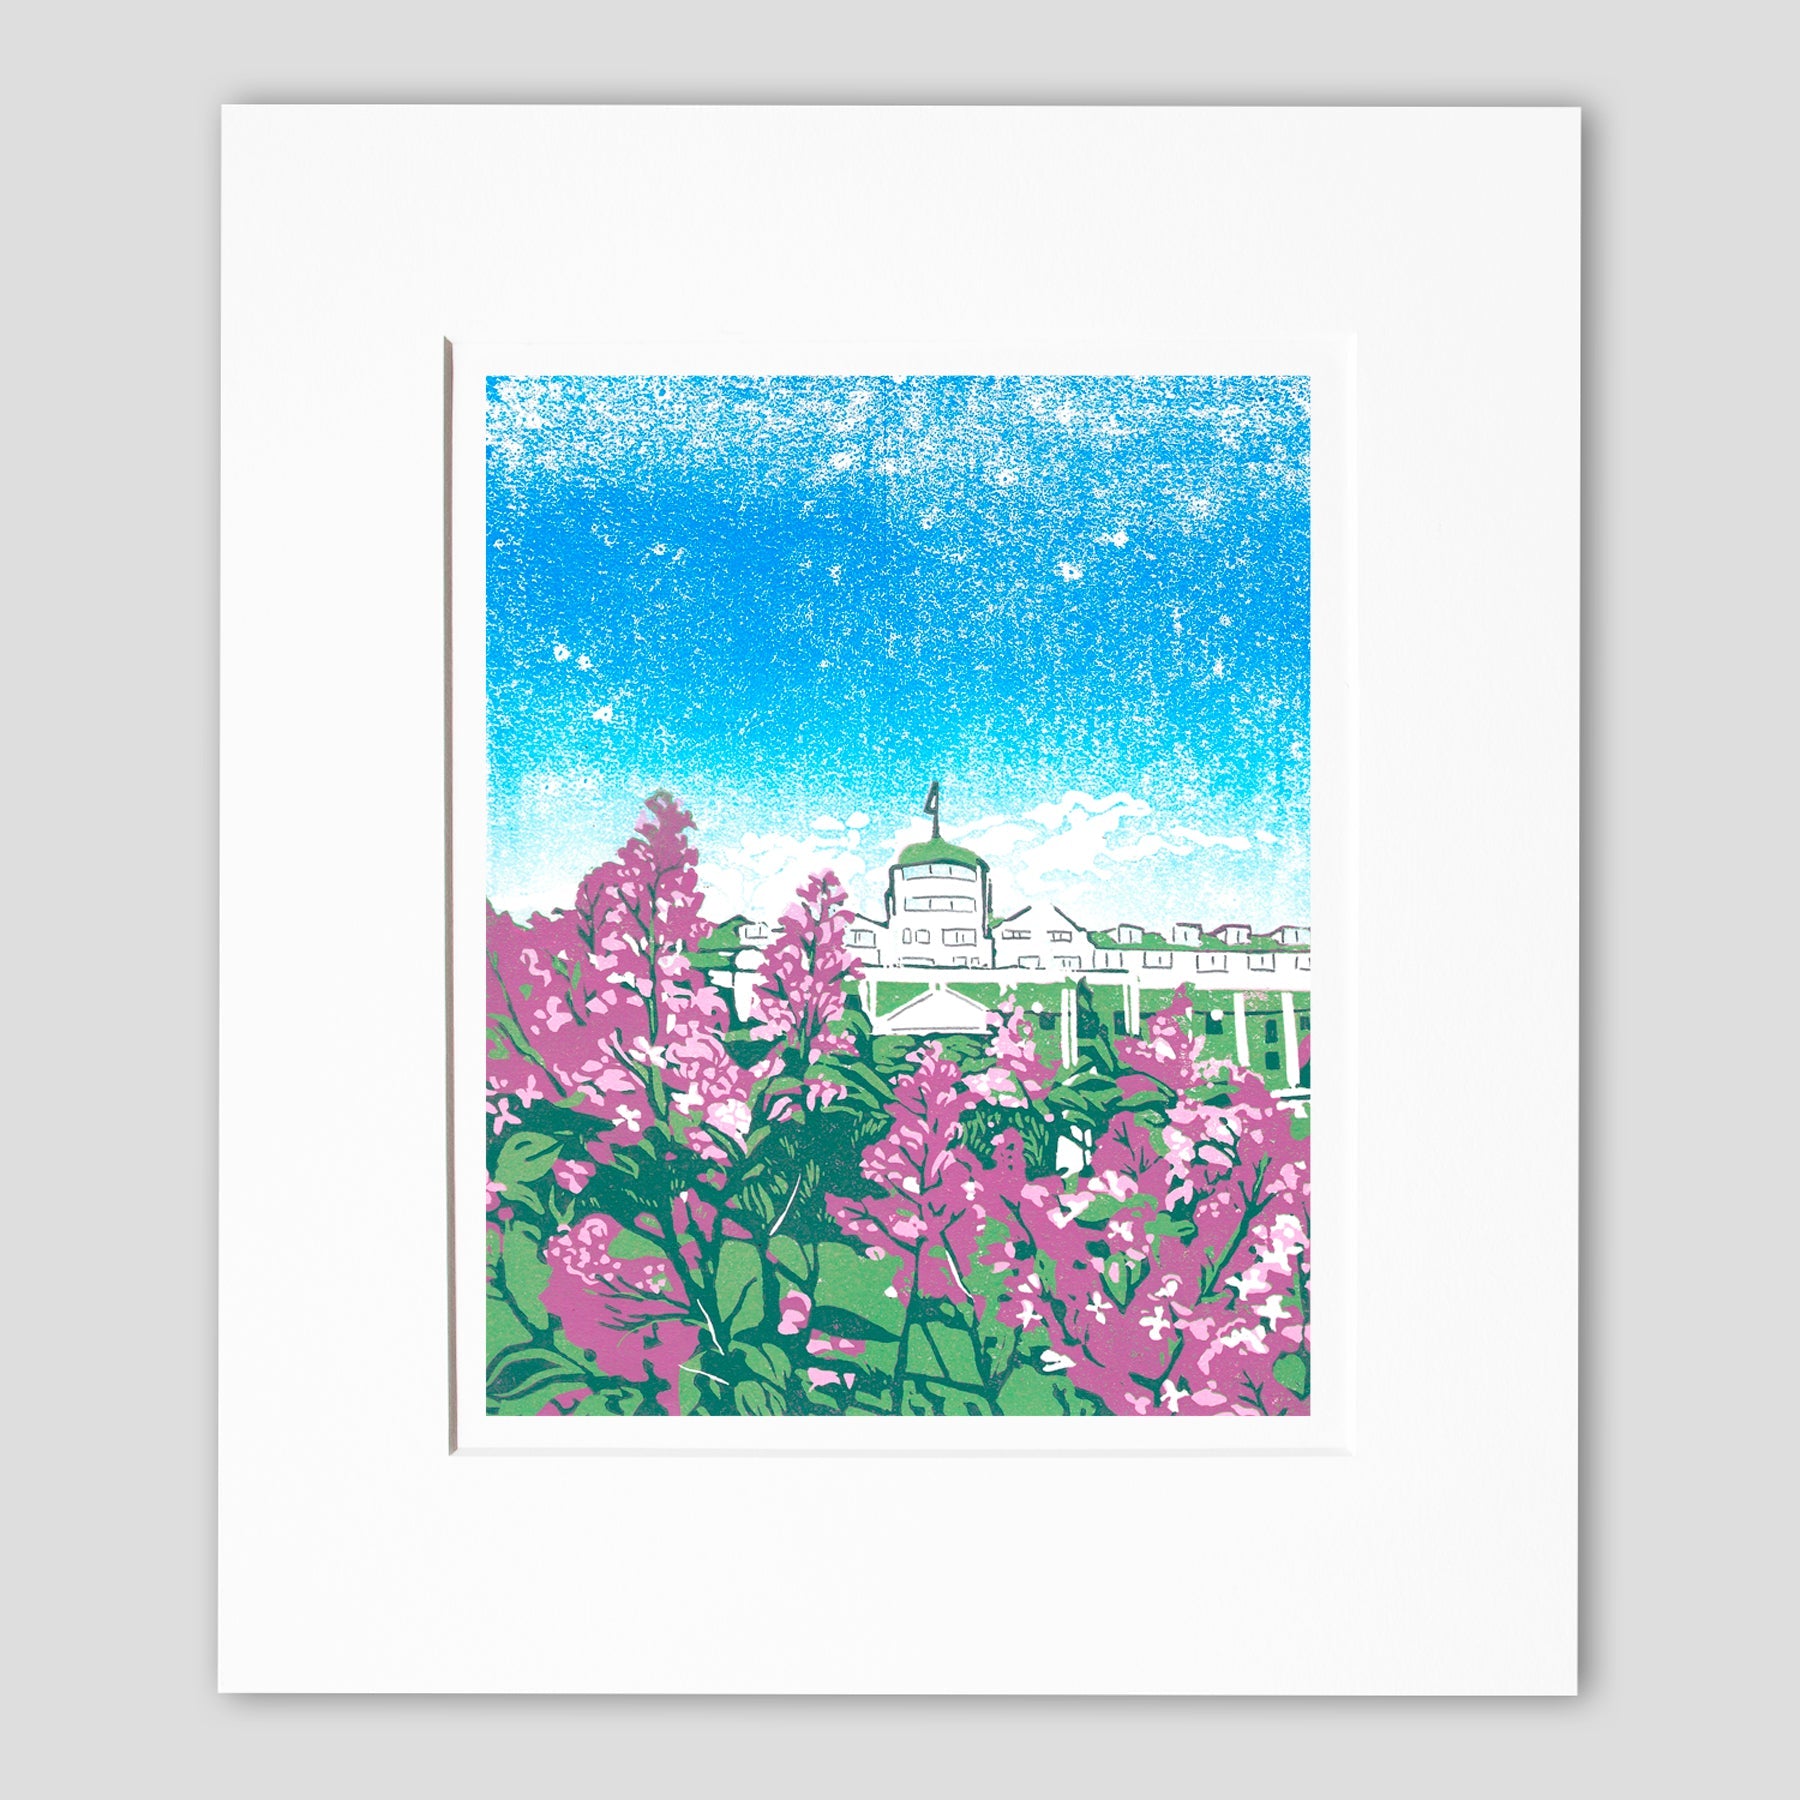 June at the Grand is a multi-color linoleum block print inspired by lovely lilacs blooming in the Tea Garden of the Grand Hotel. 